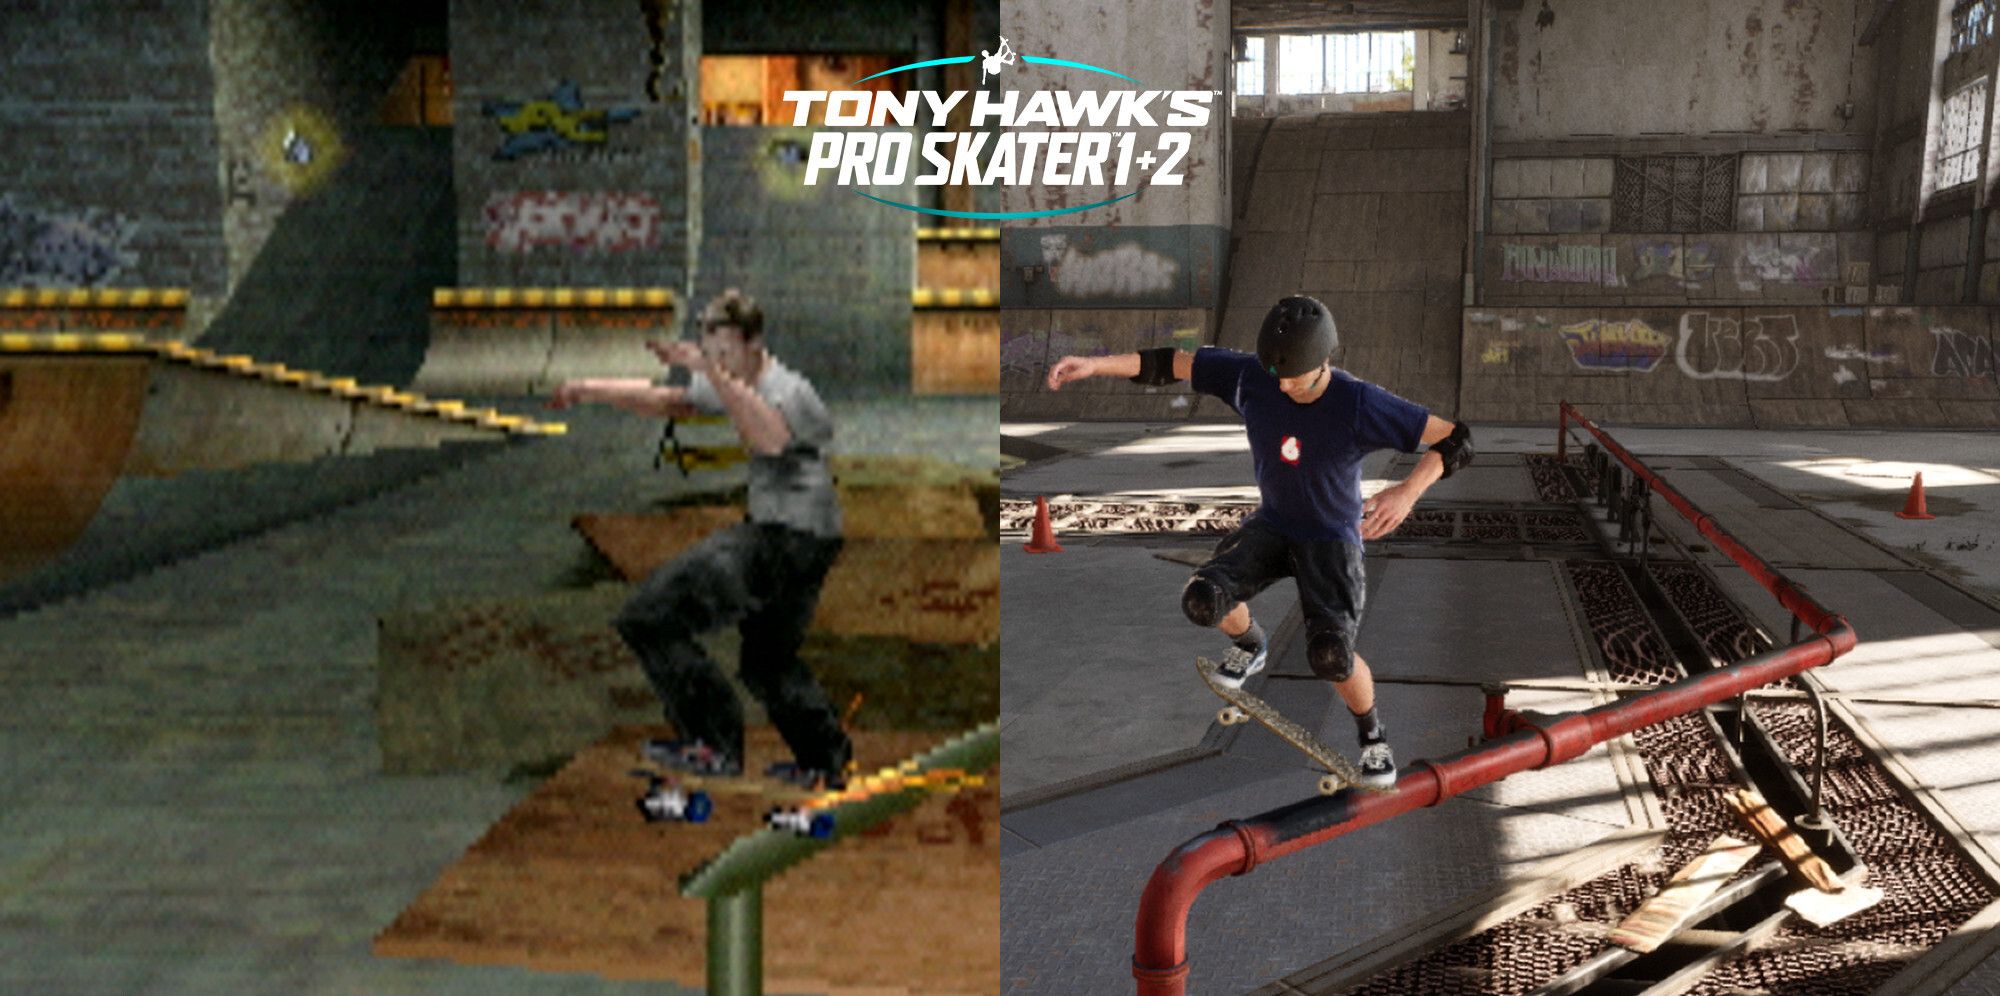 A Tony Hawk's Pro Skater Documentary Is Coming Soon, Featuring The